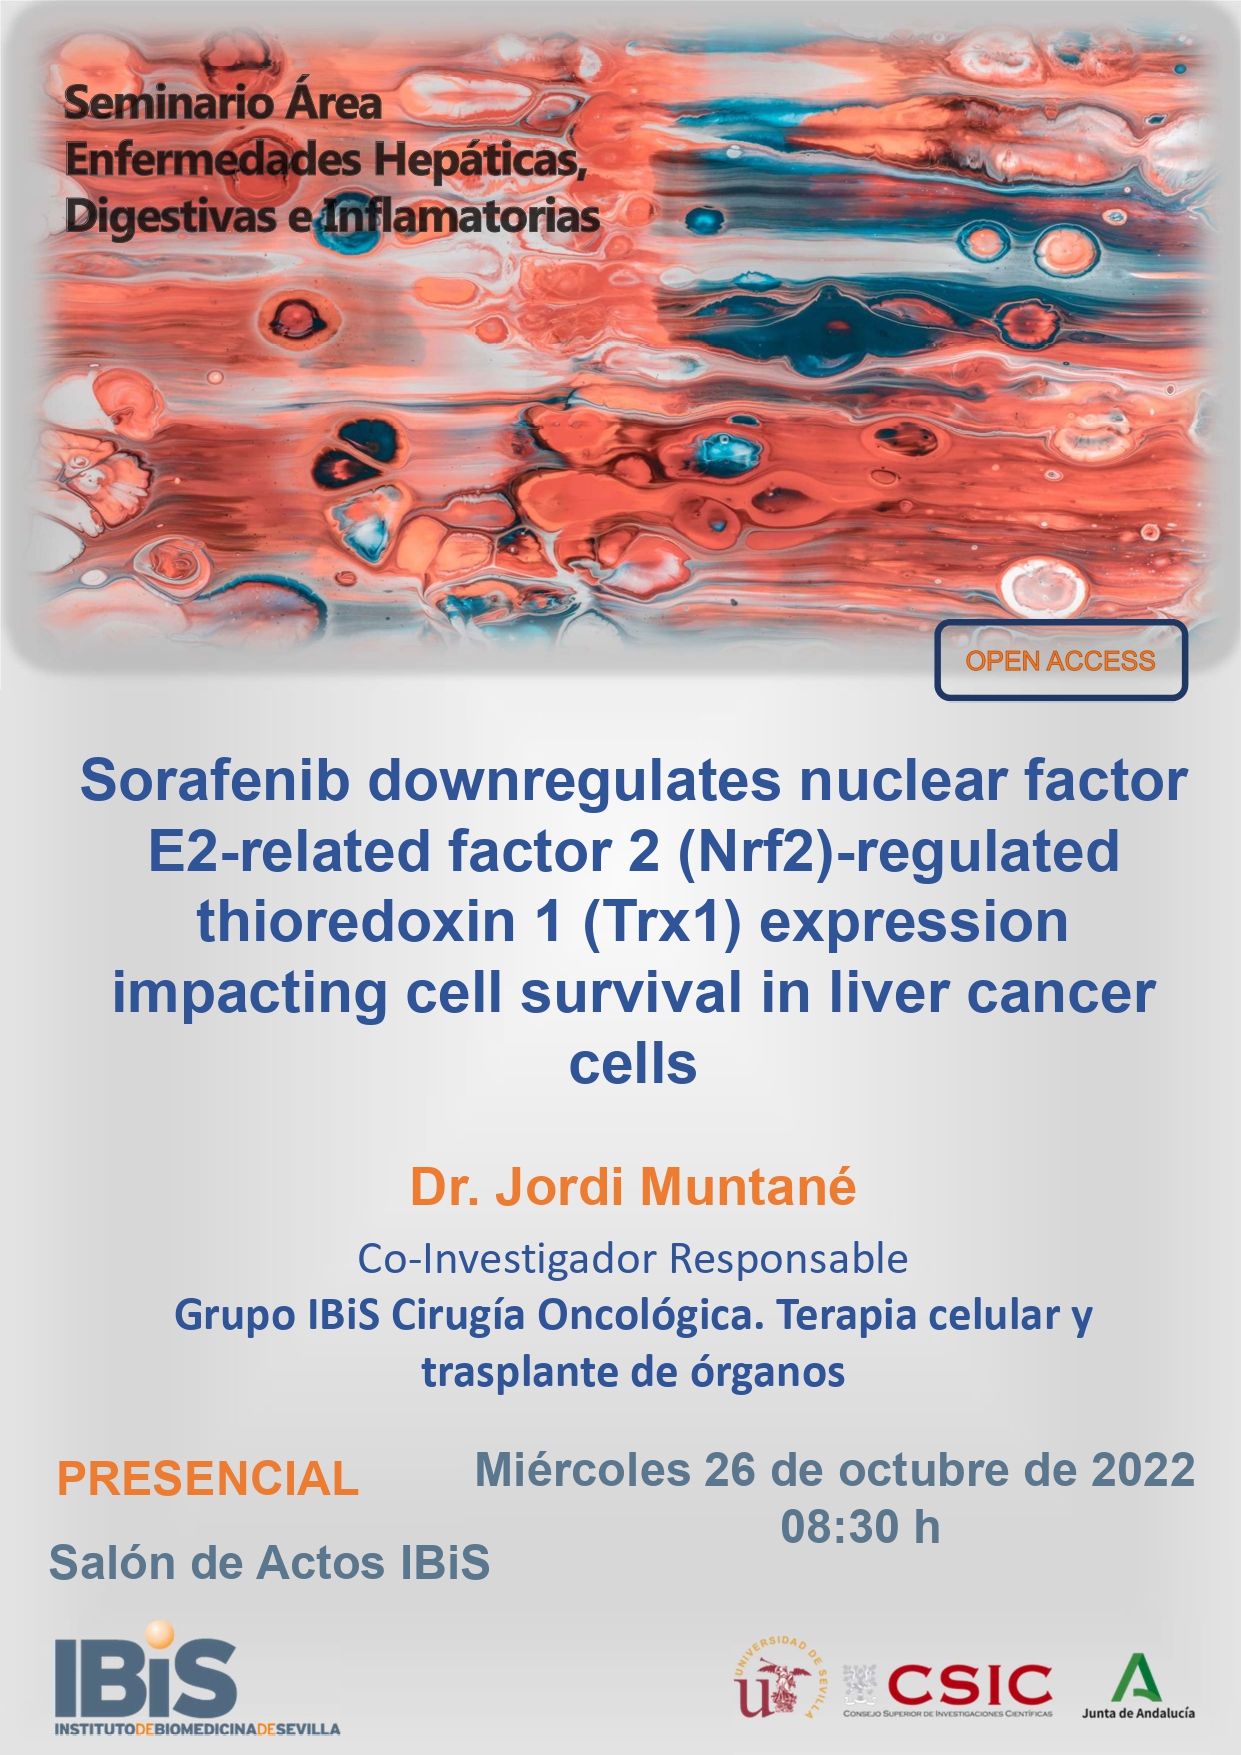 Poster: Sorafenib downregulates nuclear factor E2-related factor 2 (Nrf2)-regulated thioredoxin 1 (Trx1) expression impacting cell survival in liver cancer cells